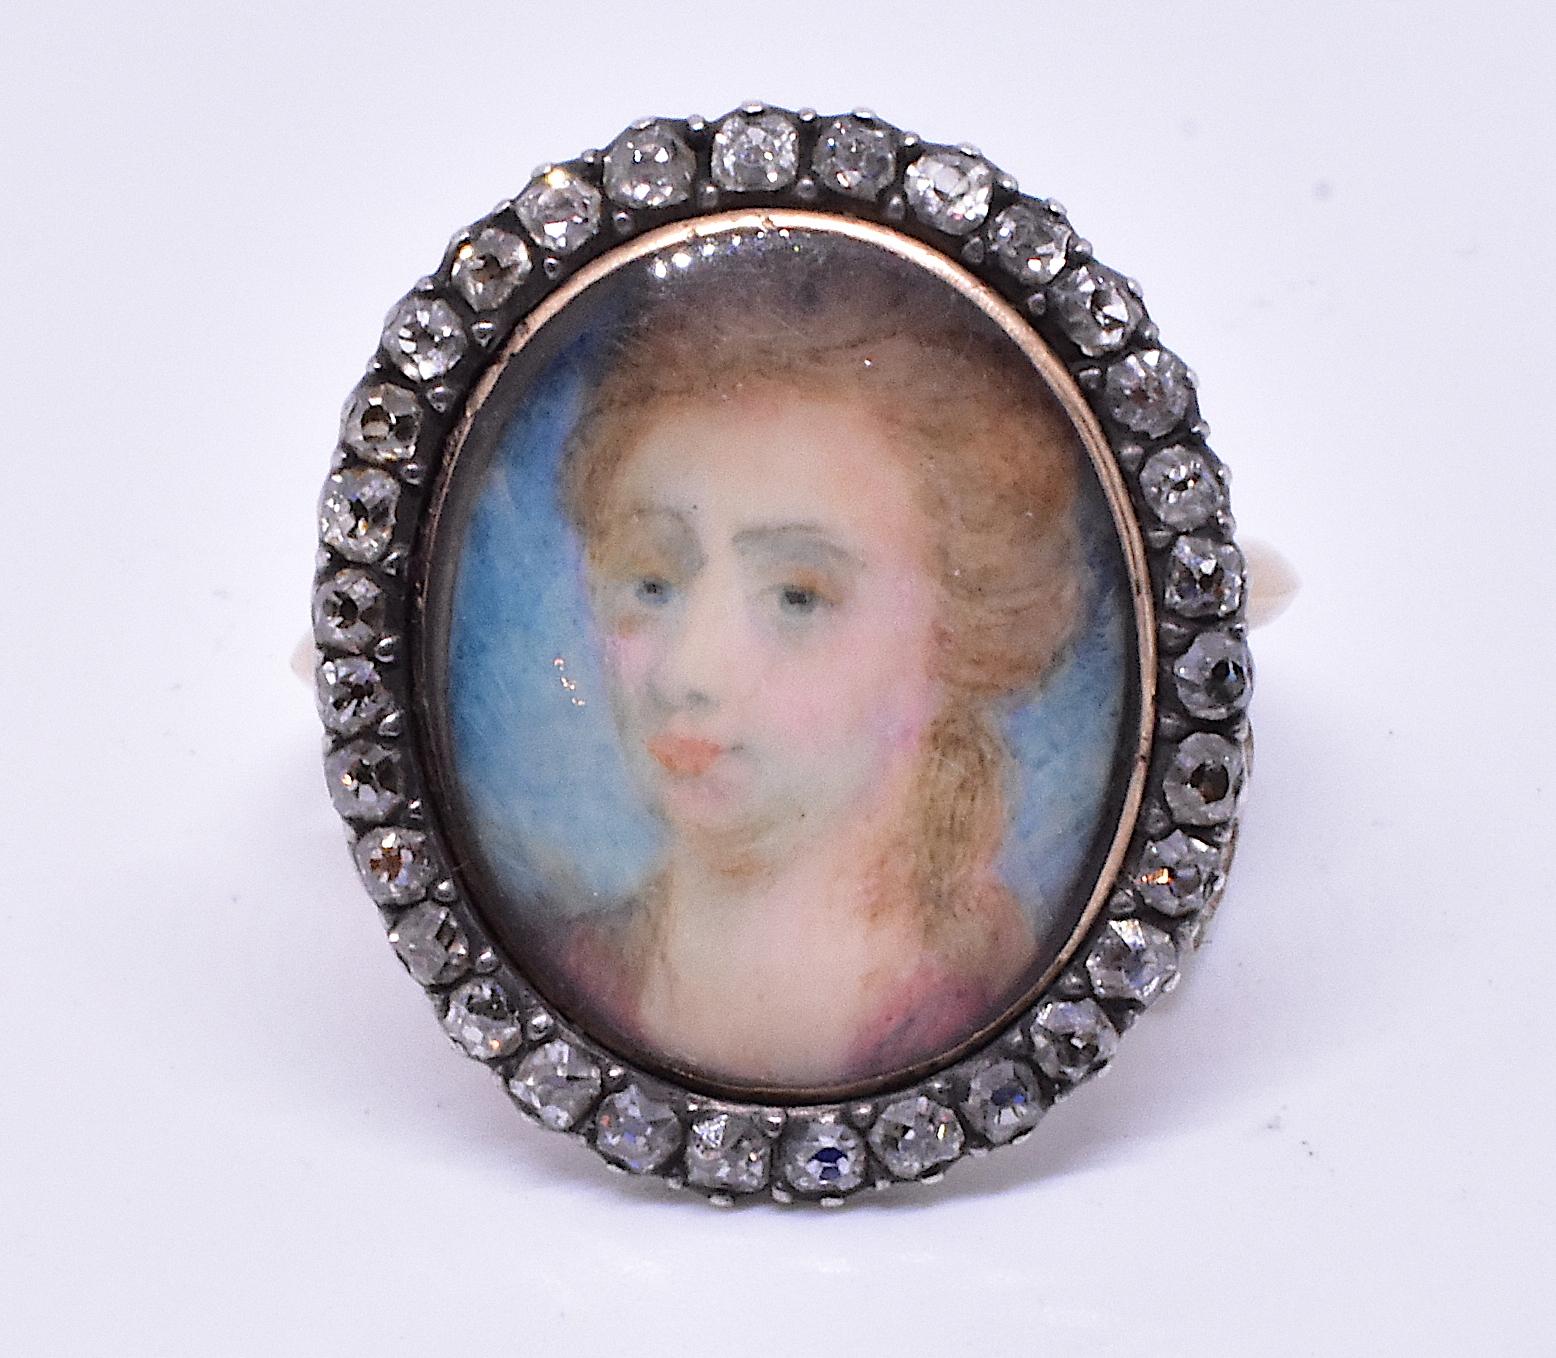 18K eighteenth-century portrait ring under crystal of Sarah Churchill, Duchess of Marlborough. Miniature portraits were painted on vellum or ivory and given as tokens of love to husbands and wives or parents and children. Portrait rings with diamond